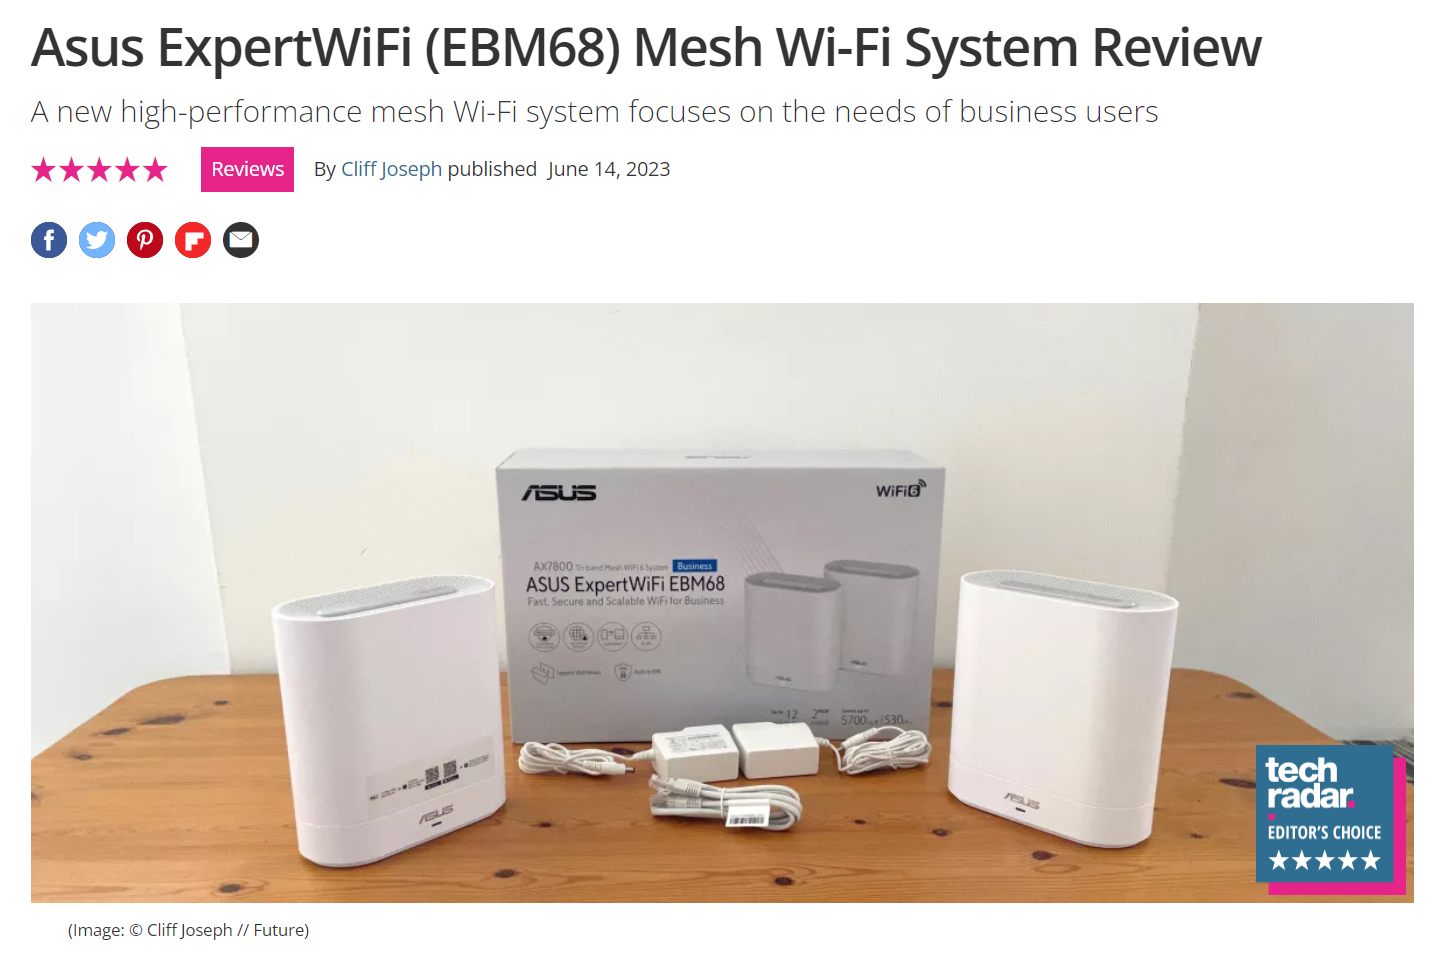 Asus ExpertWiFi (EBM68) Mesh Wi-Fi System Review